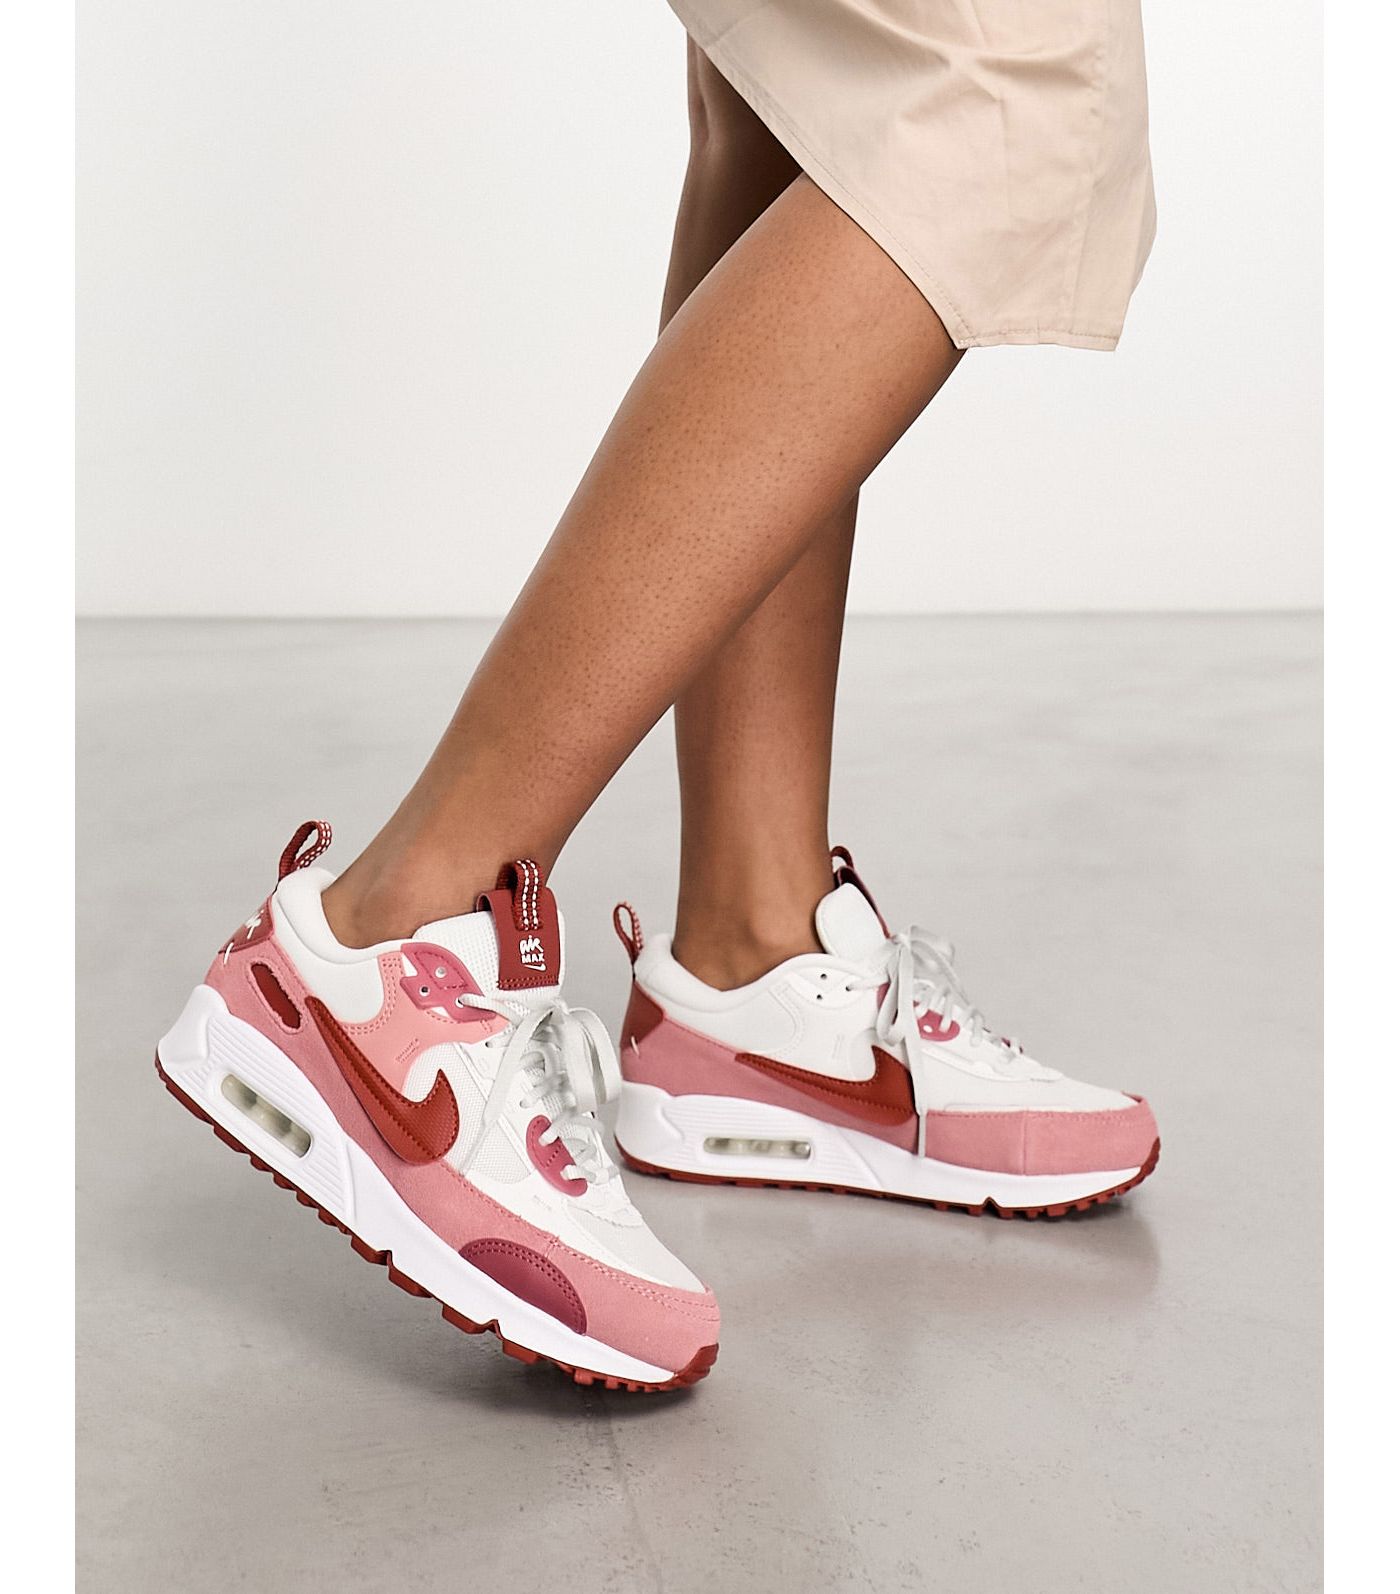 Nike Air Max 90 Futura trainers in red stardust and white